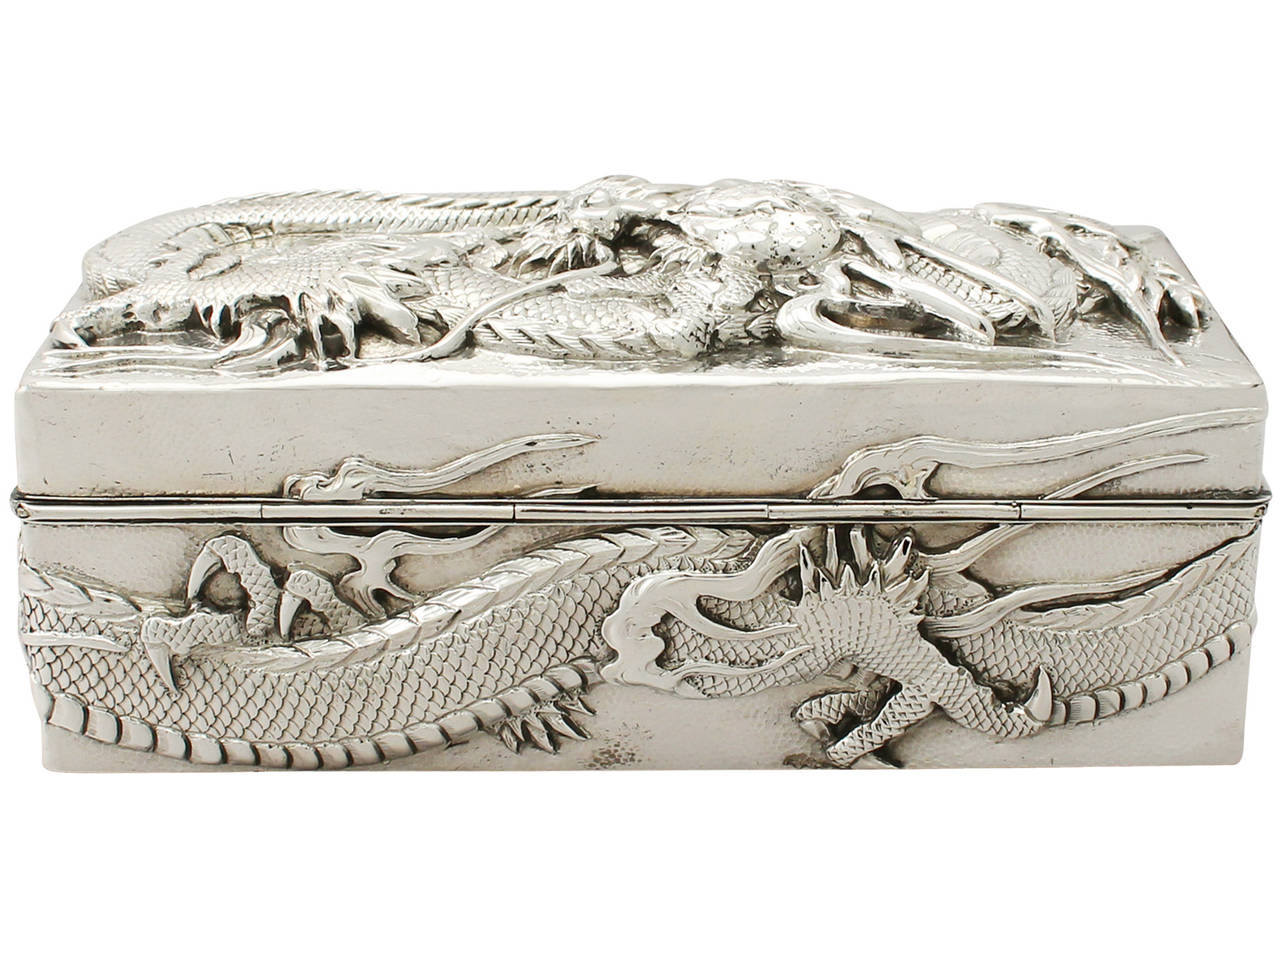 An exceptional, fine and impressive antique Chinese Export silver double skin box; an addition to our range of silver boxes and cases.

This exceptional antique Chinese Export Silver box has a plain rectangular form.

The surface of the body is